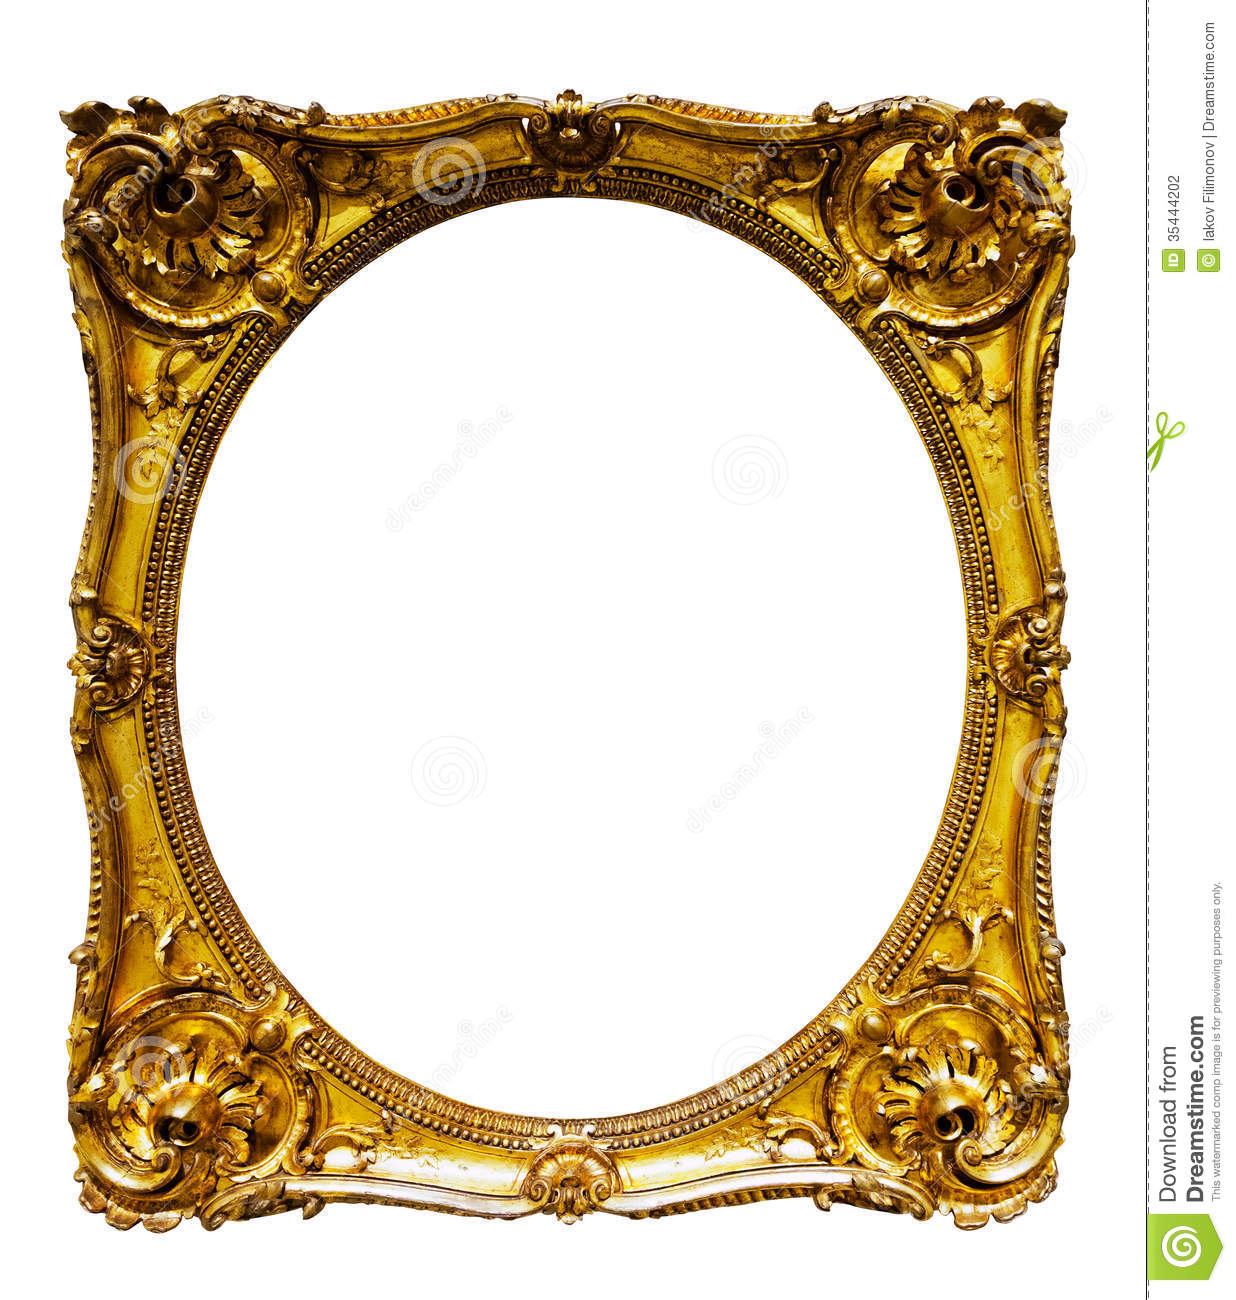 Oval Gold Picture Frame  Isolated Over White Background May Be Used